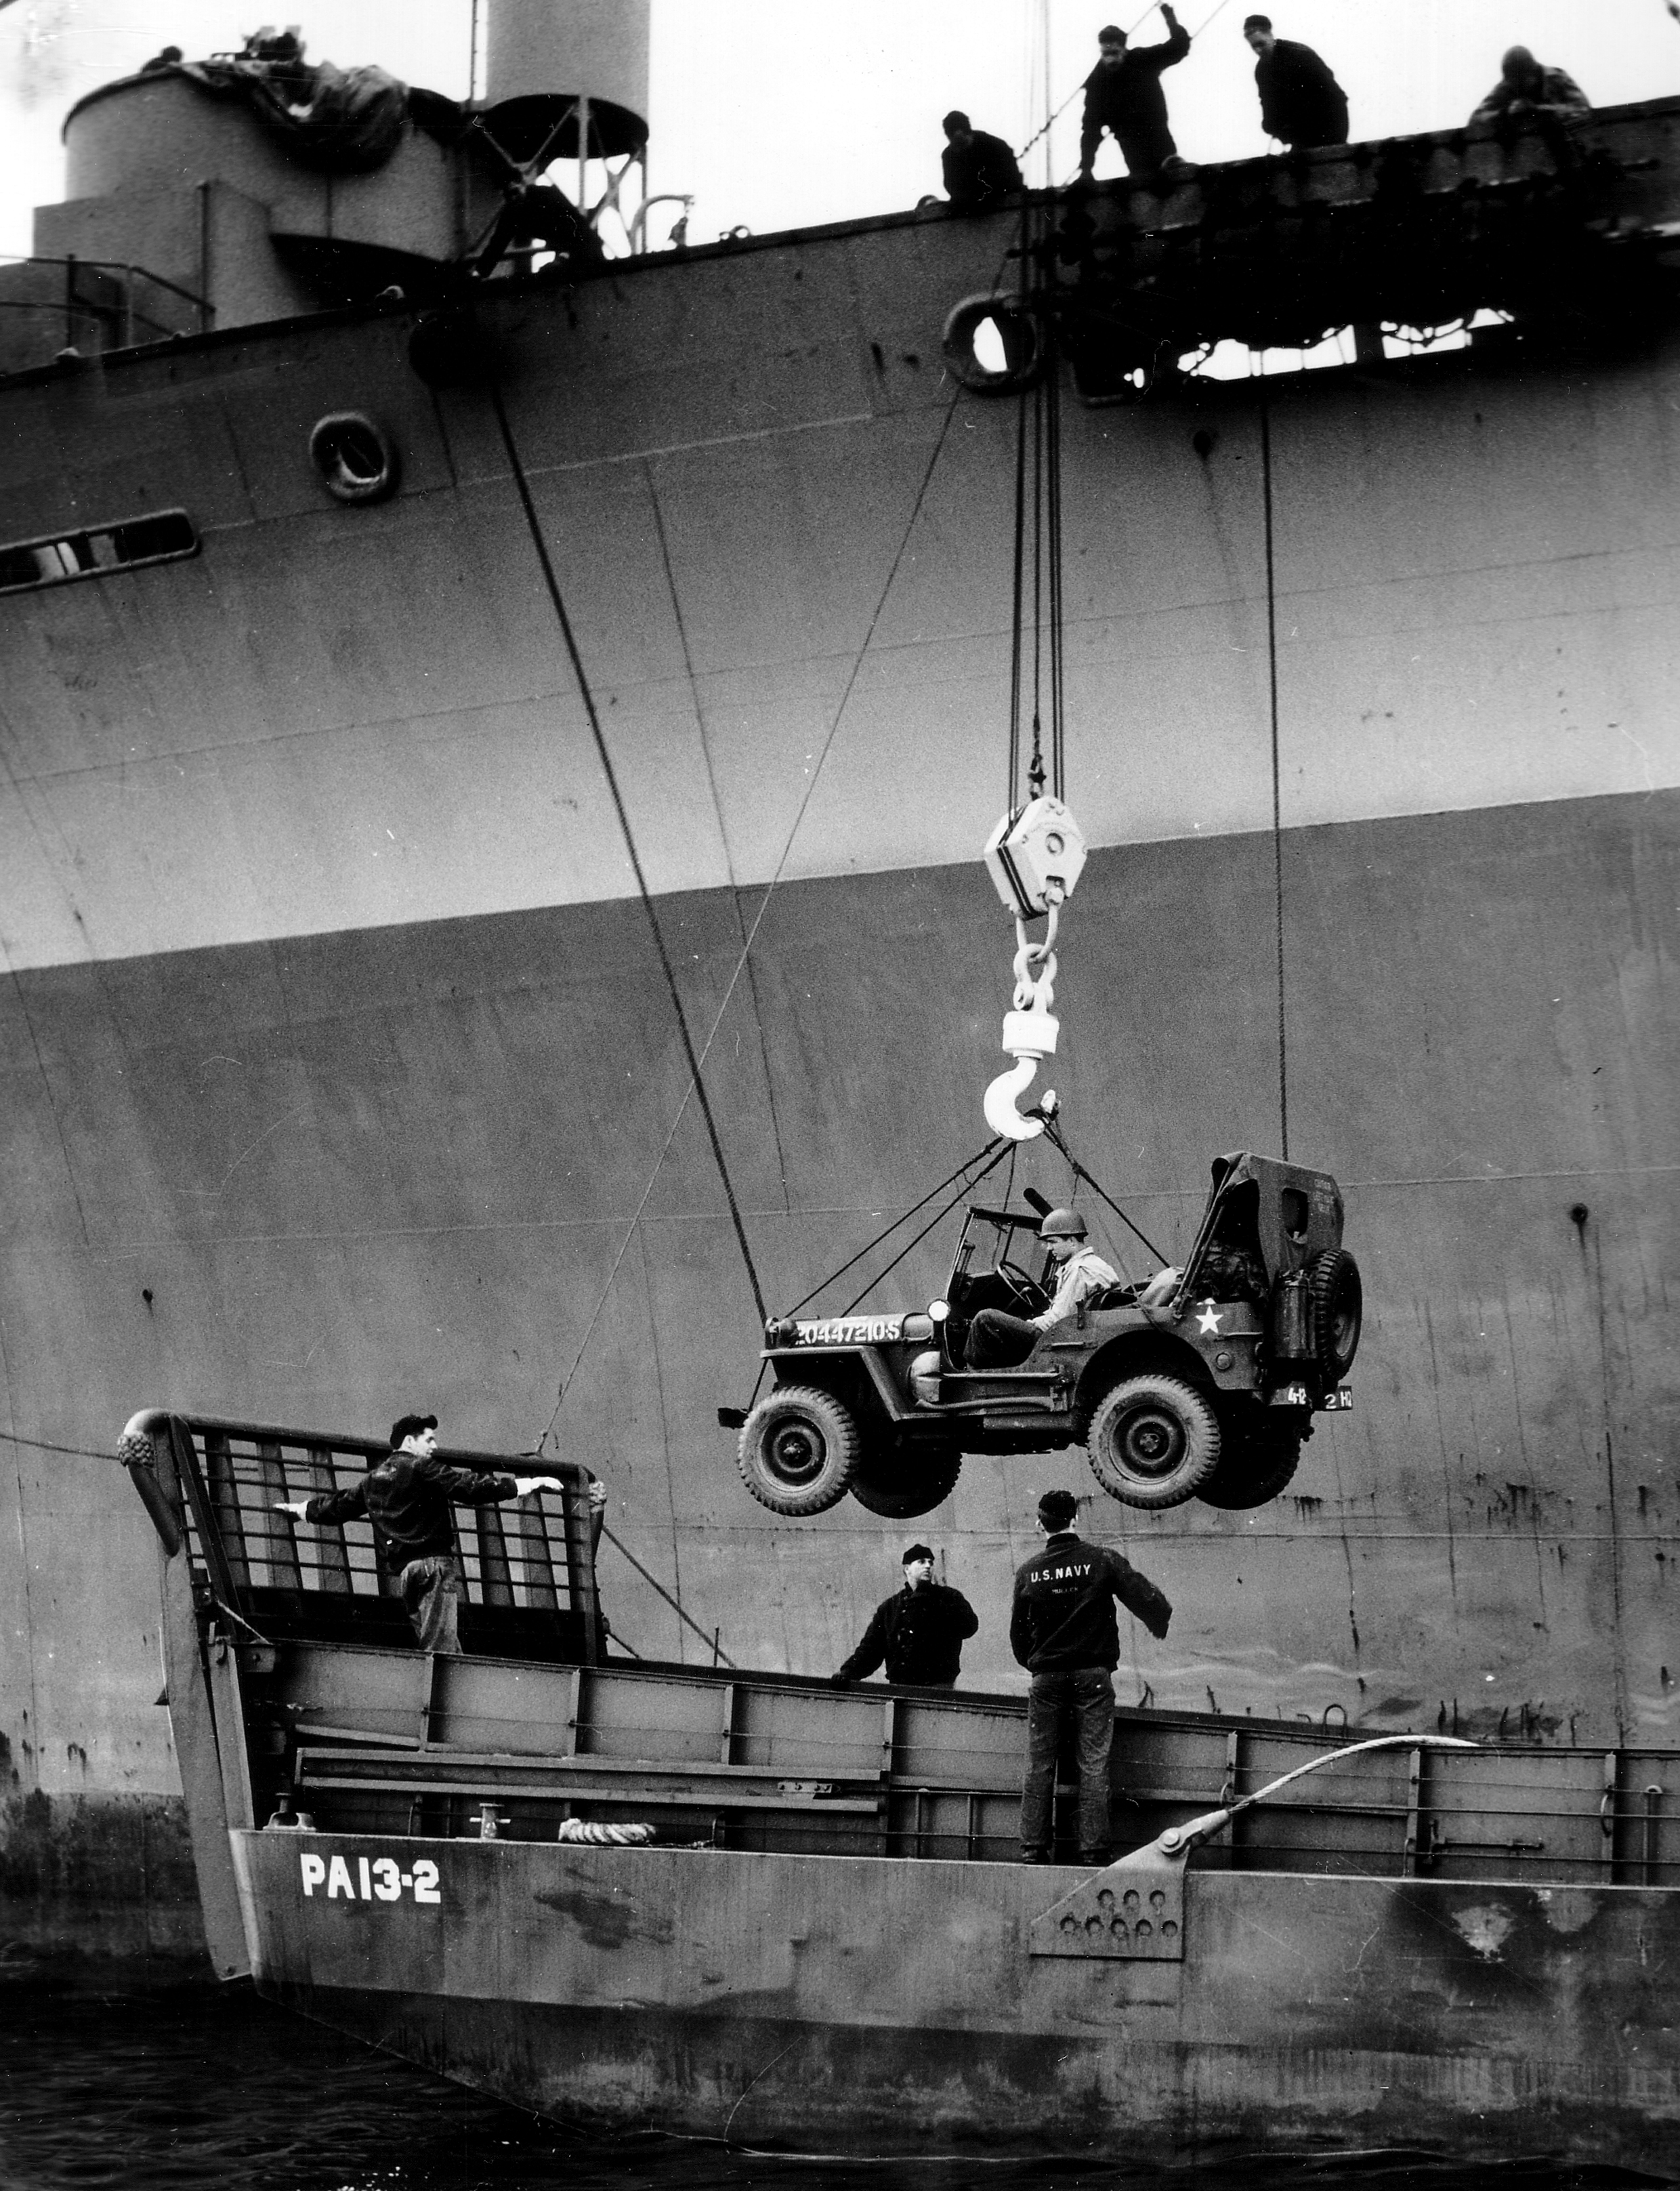 A Jeep being lowered into an LCM from Attack Transport USS Joseph T. Dickman (APA-13 – former SS President Roosevelt), manned by USCG personnel off Normandy, June 1944. Photo 1 of 2